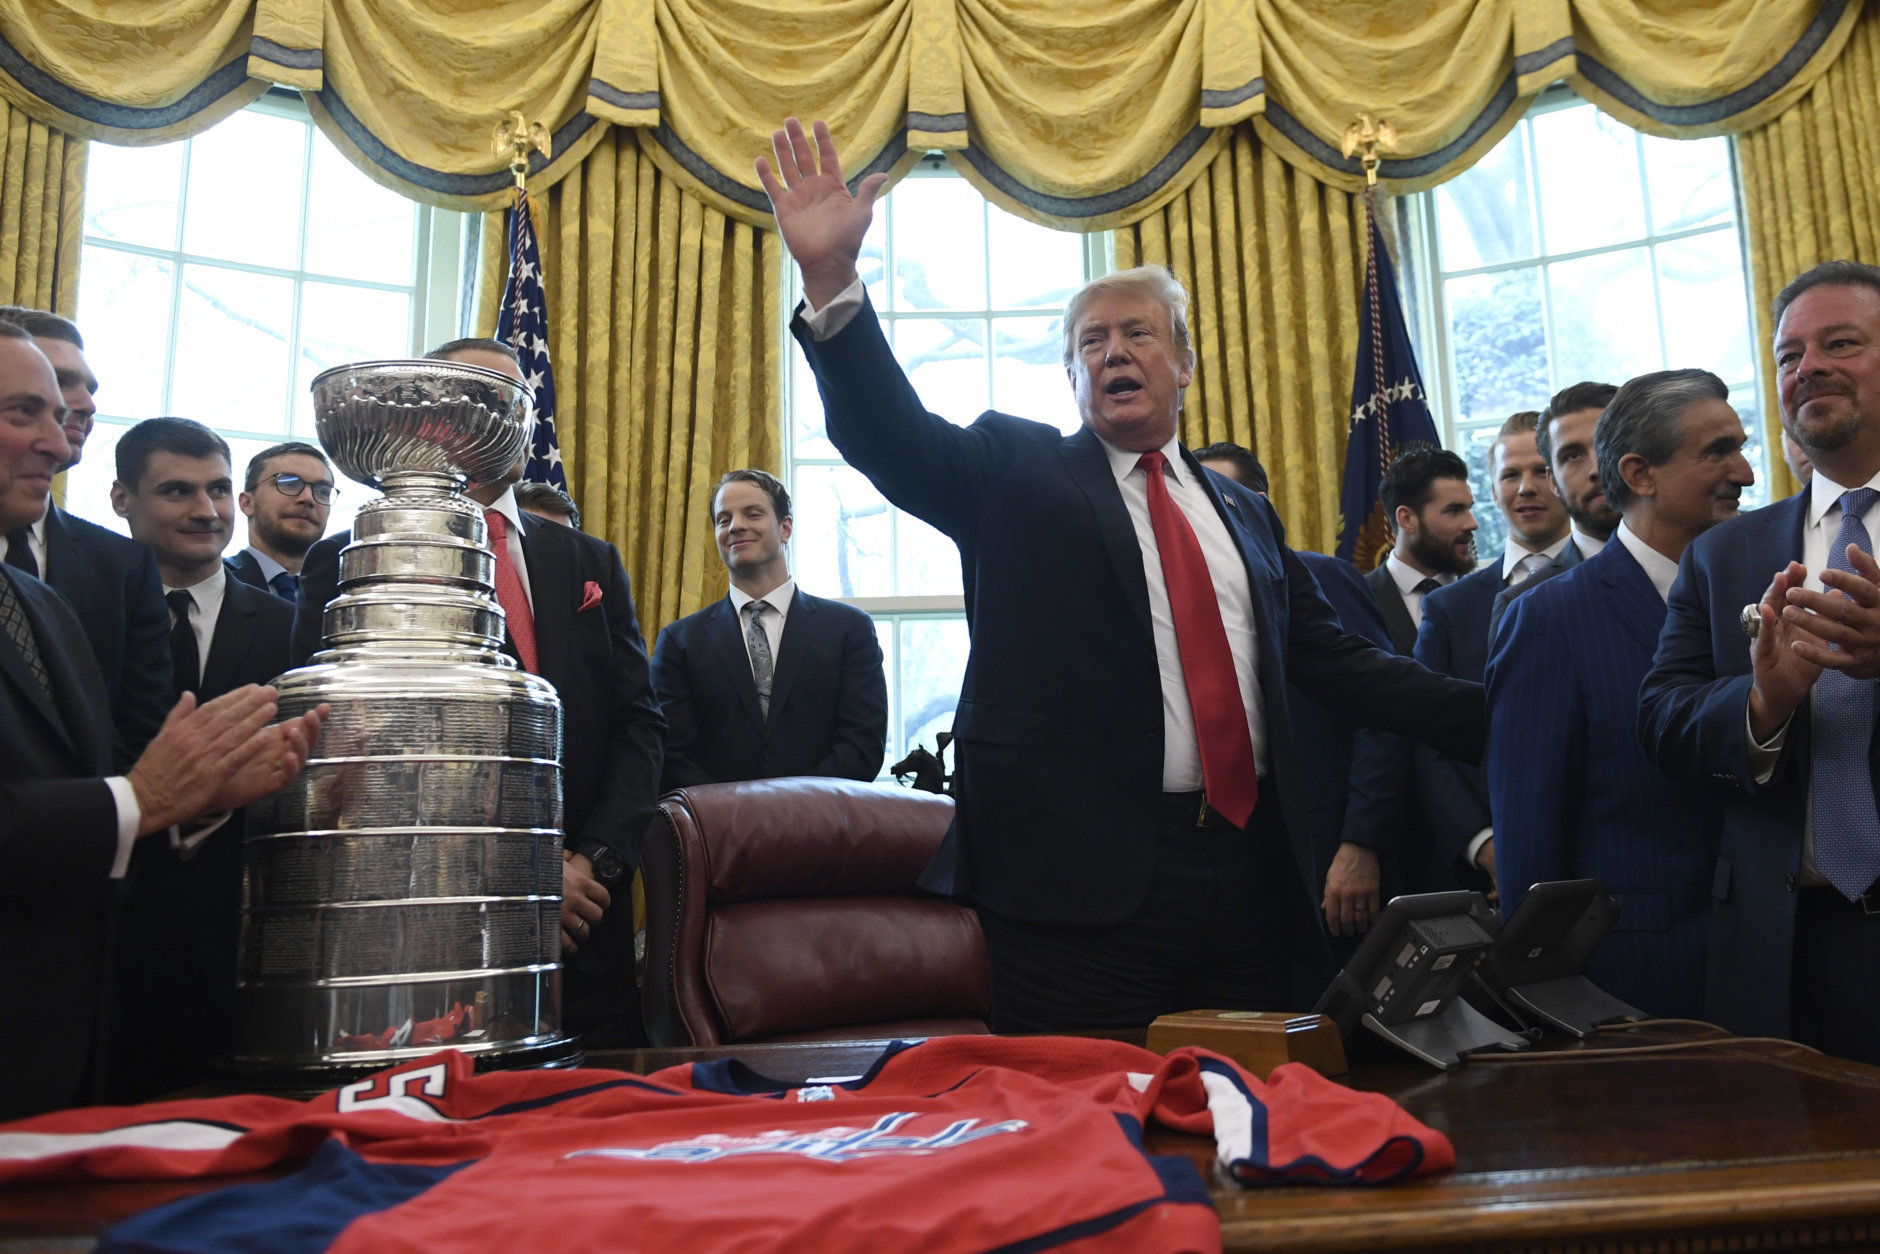 President Donald Trump, center, waves after hosting the 2018 Stanley Cup Champion Washington Capitals hockey team in the Oval Office of the White House in Washington, Monday, March 25, 2019. (AP Photo/Susan Walsh)